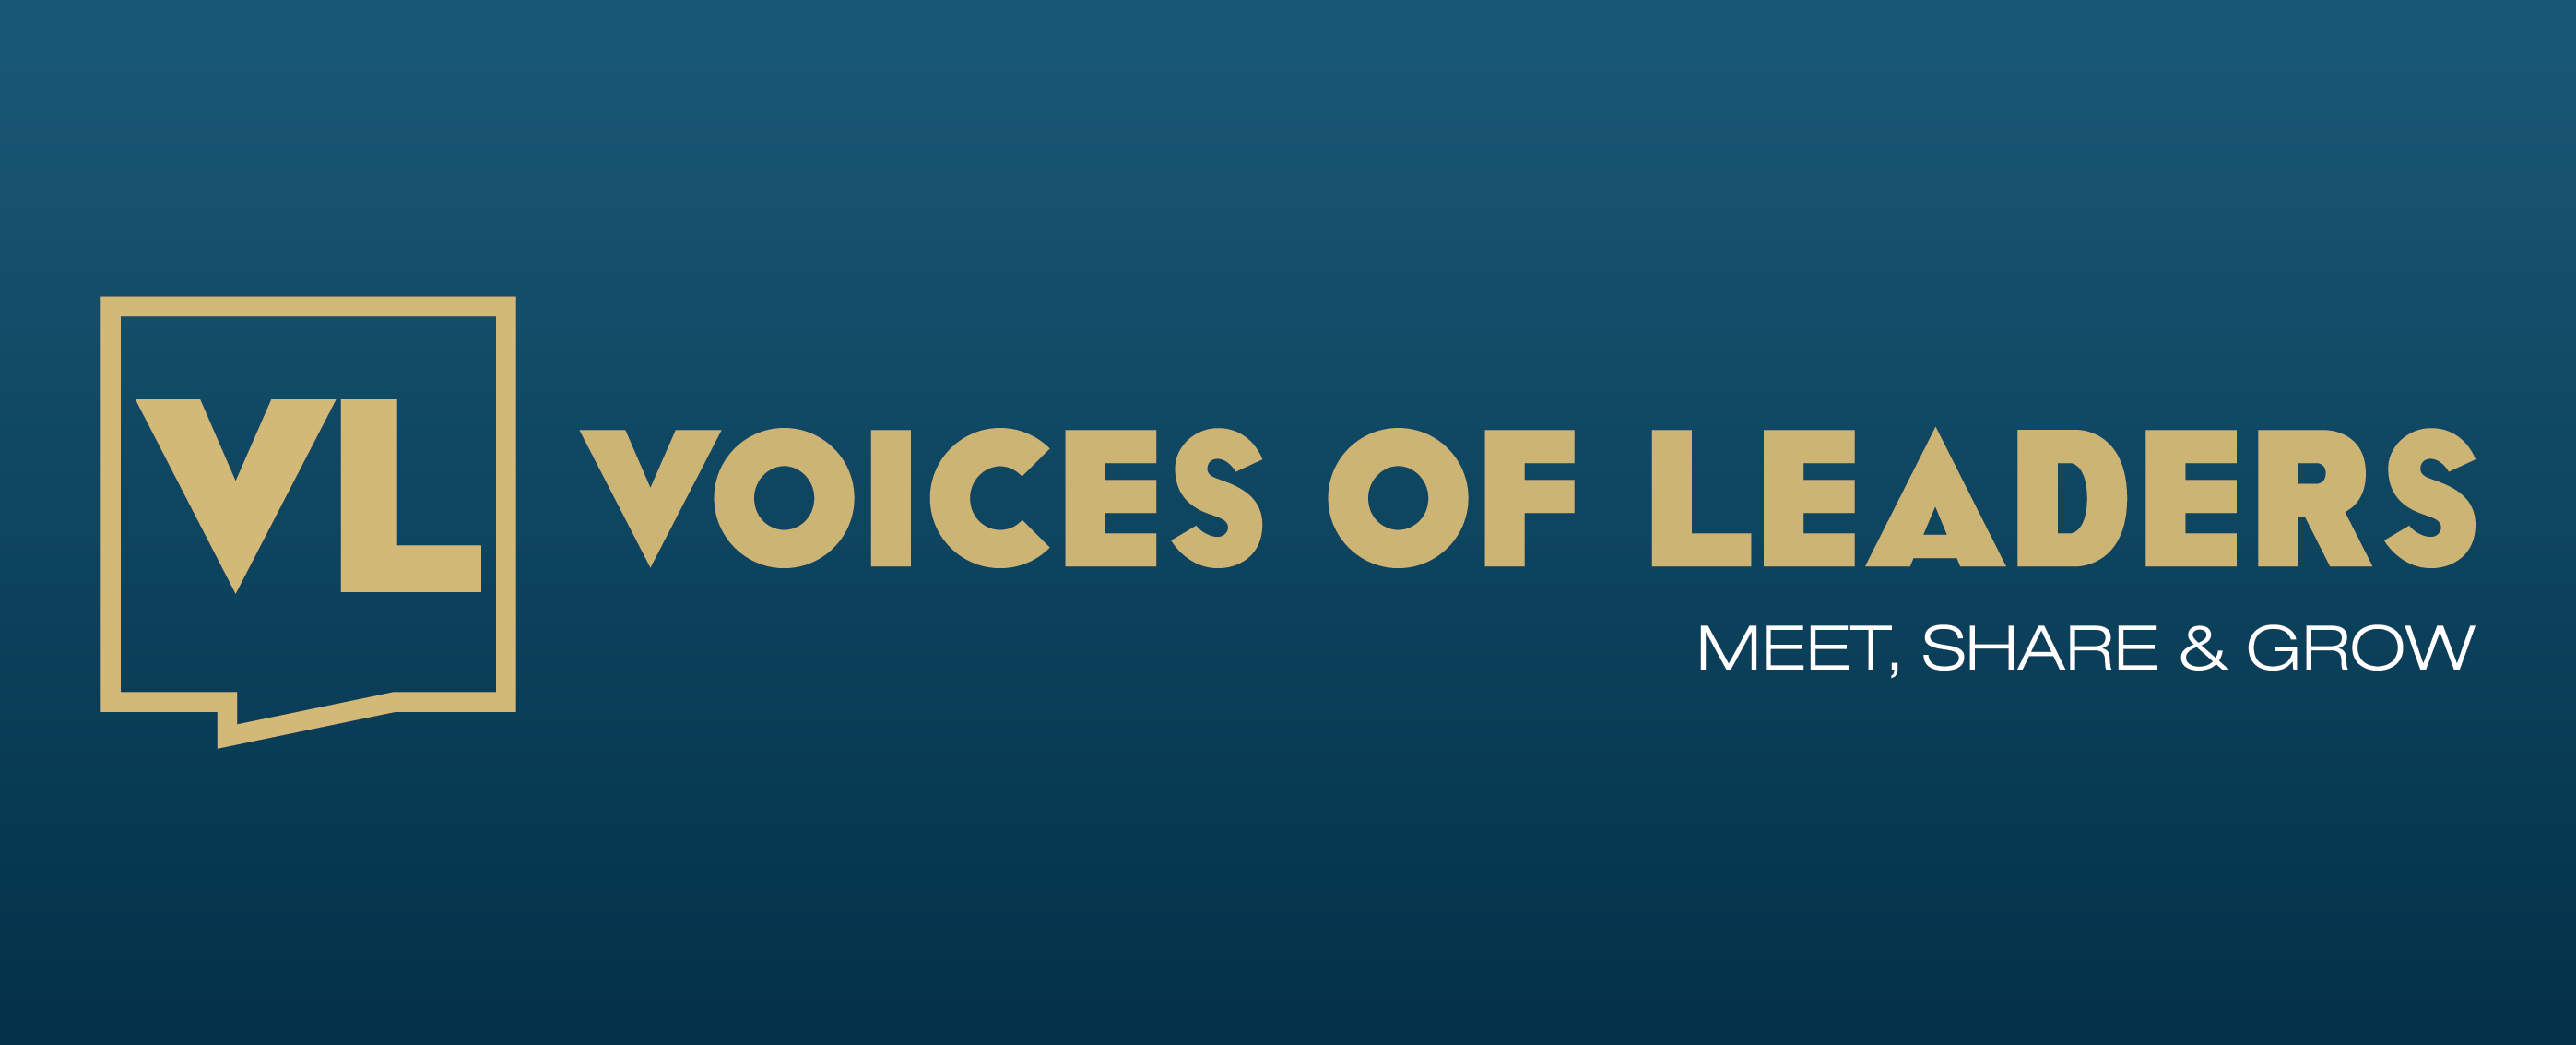 Voices of Leaders